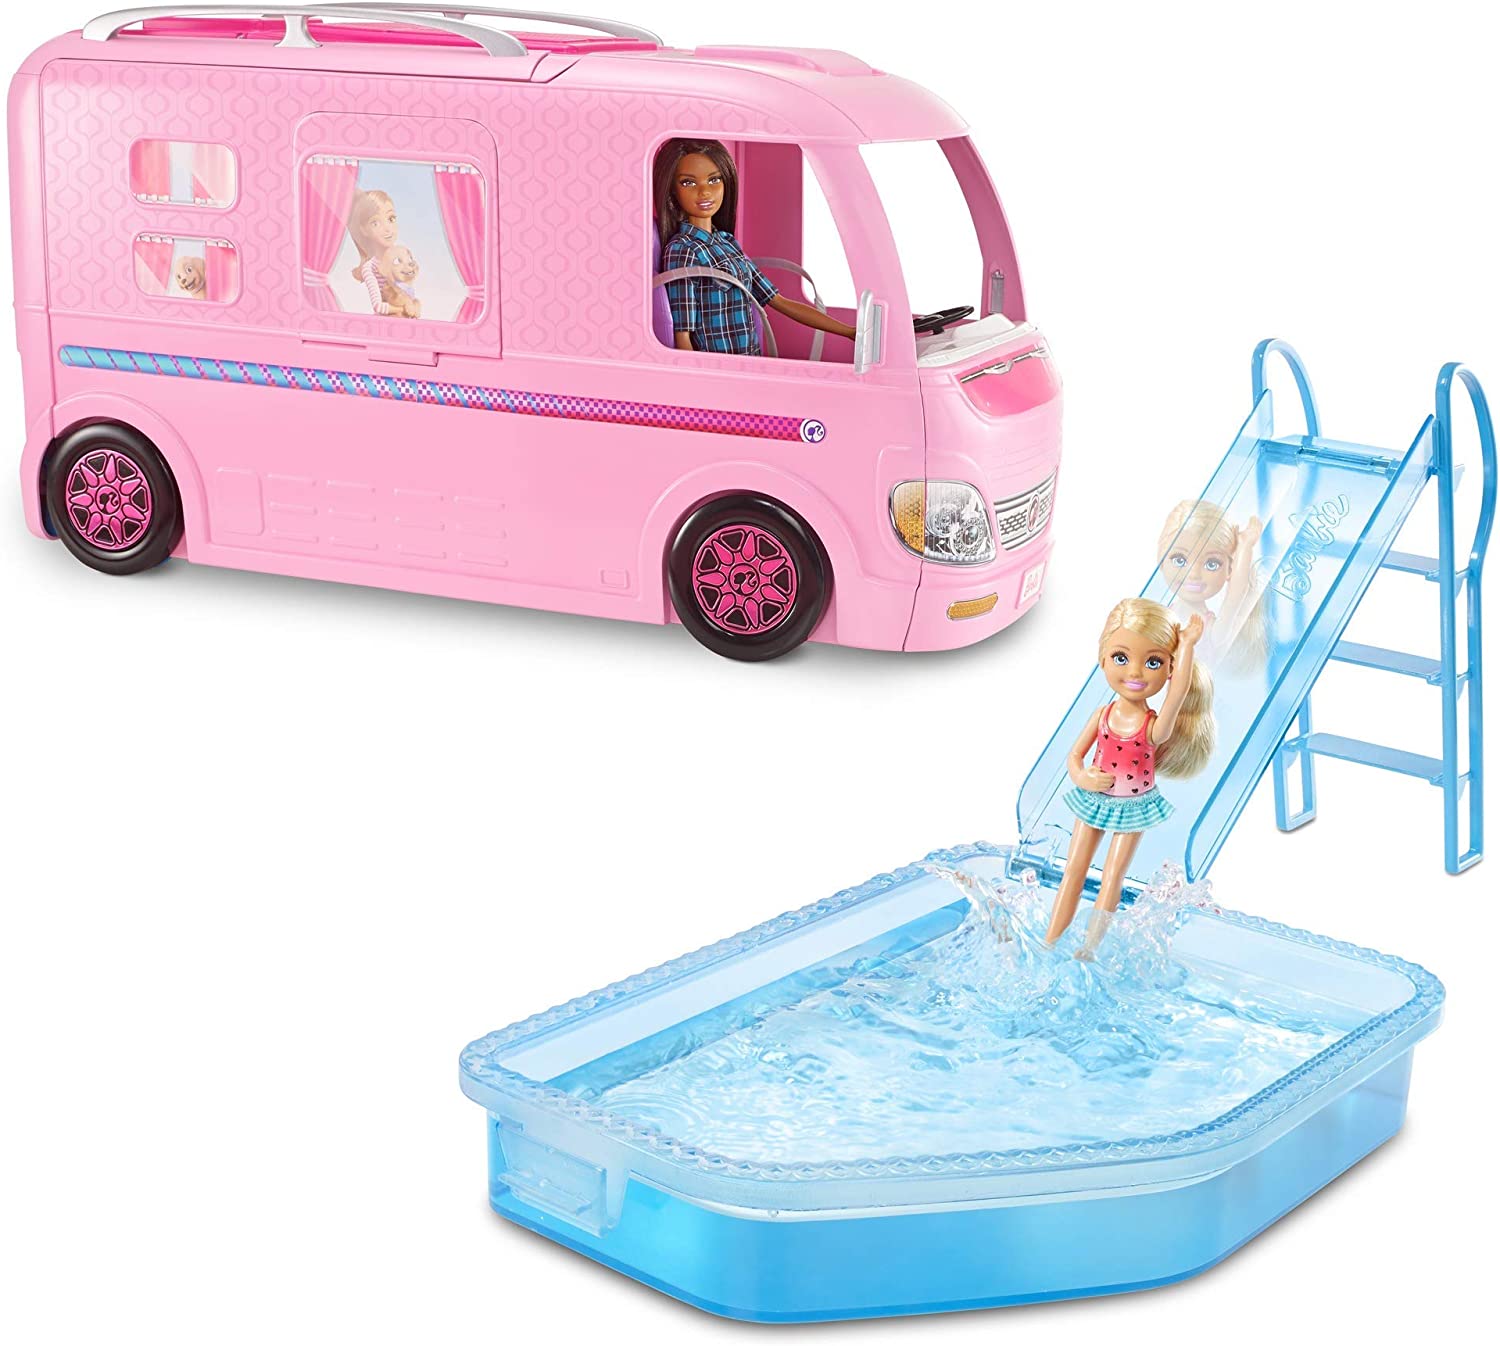 https://discounttoday.net/wp-content/uploads/2023/01/Barbie-Camper-Playset-With-Barbie-Accessories-Pool-And-Furniture-Rolling-Vehicle-With-Campsite-Transformation%E2%80%8B%E2%80%8B%E2%80%8B8.jpg